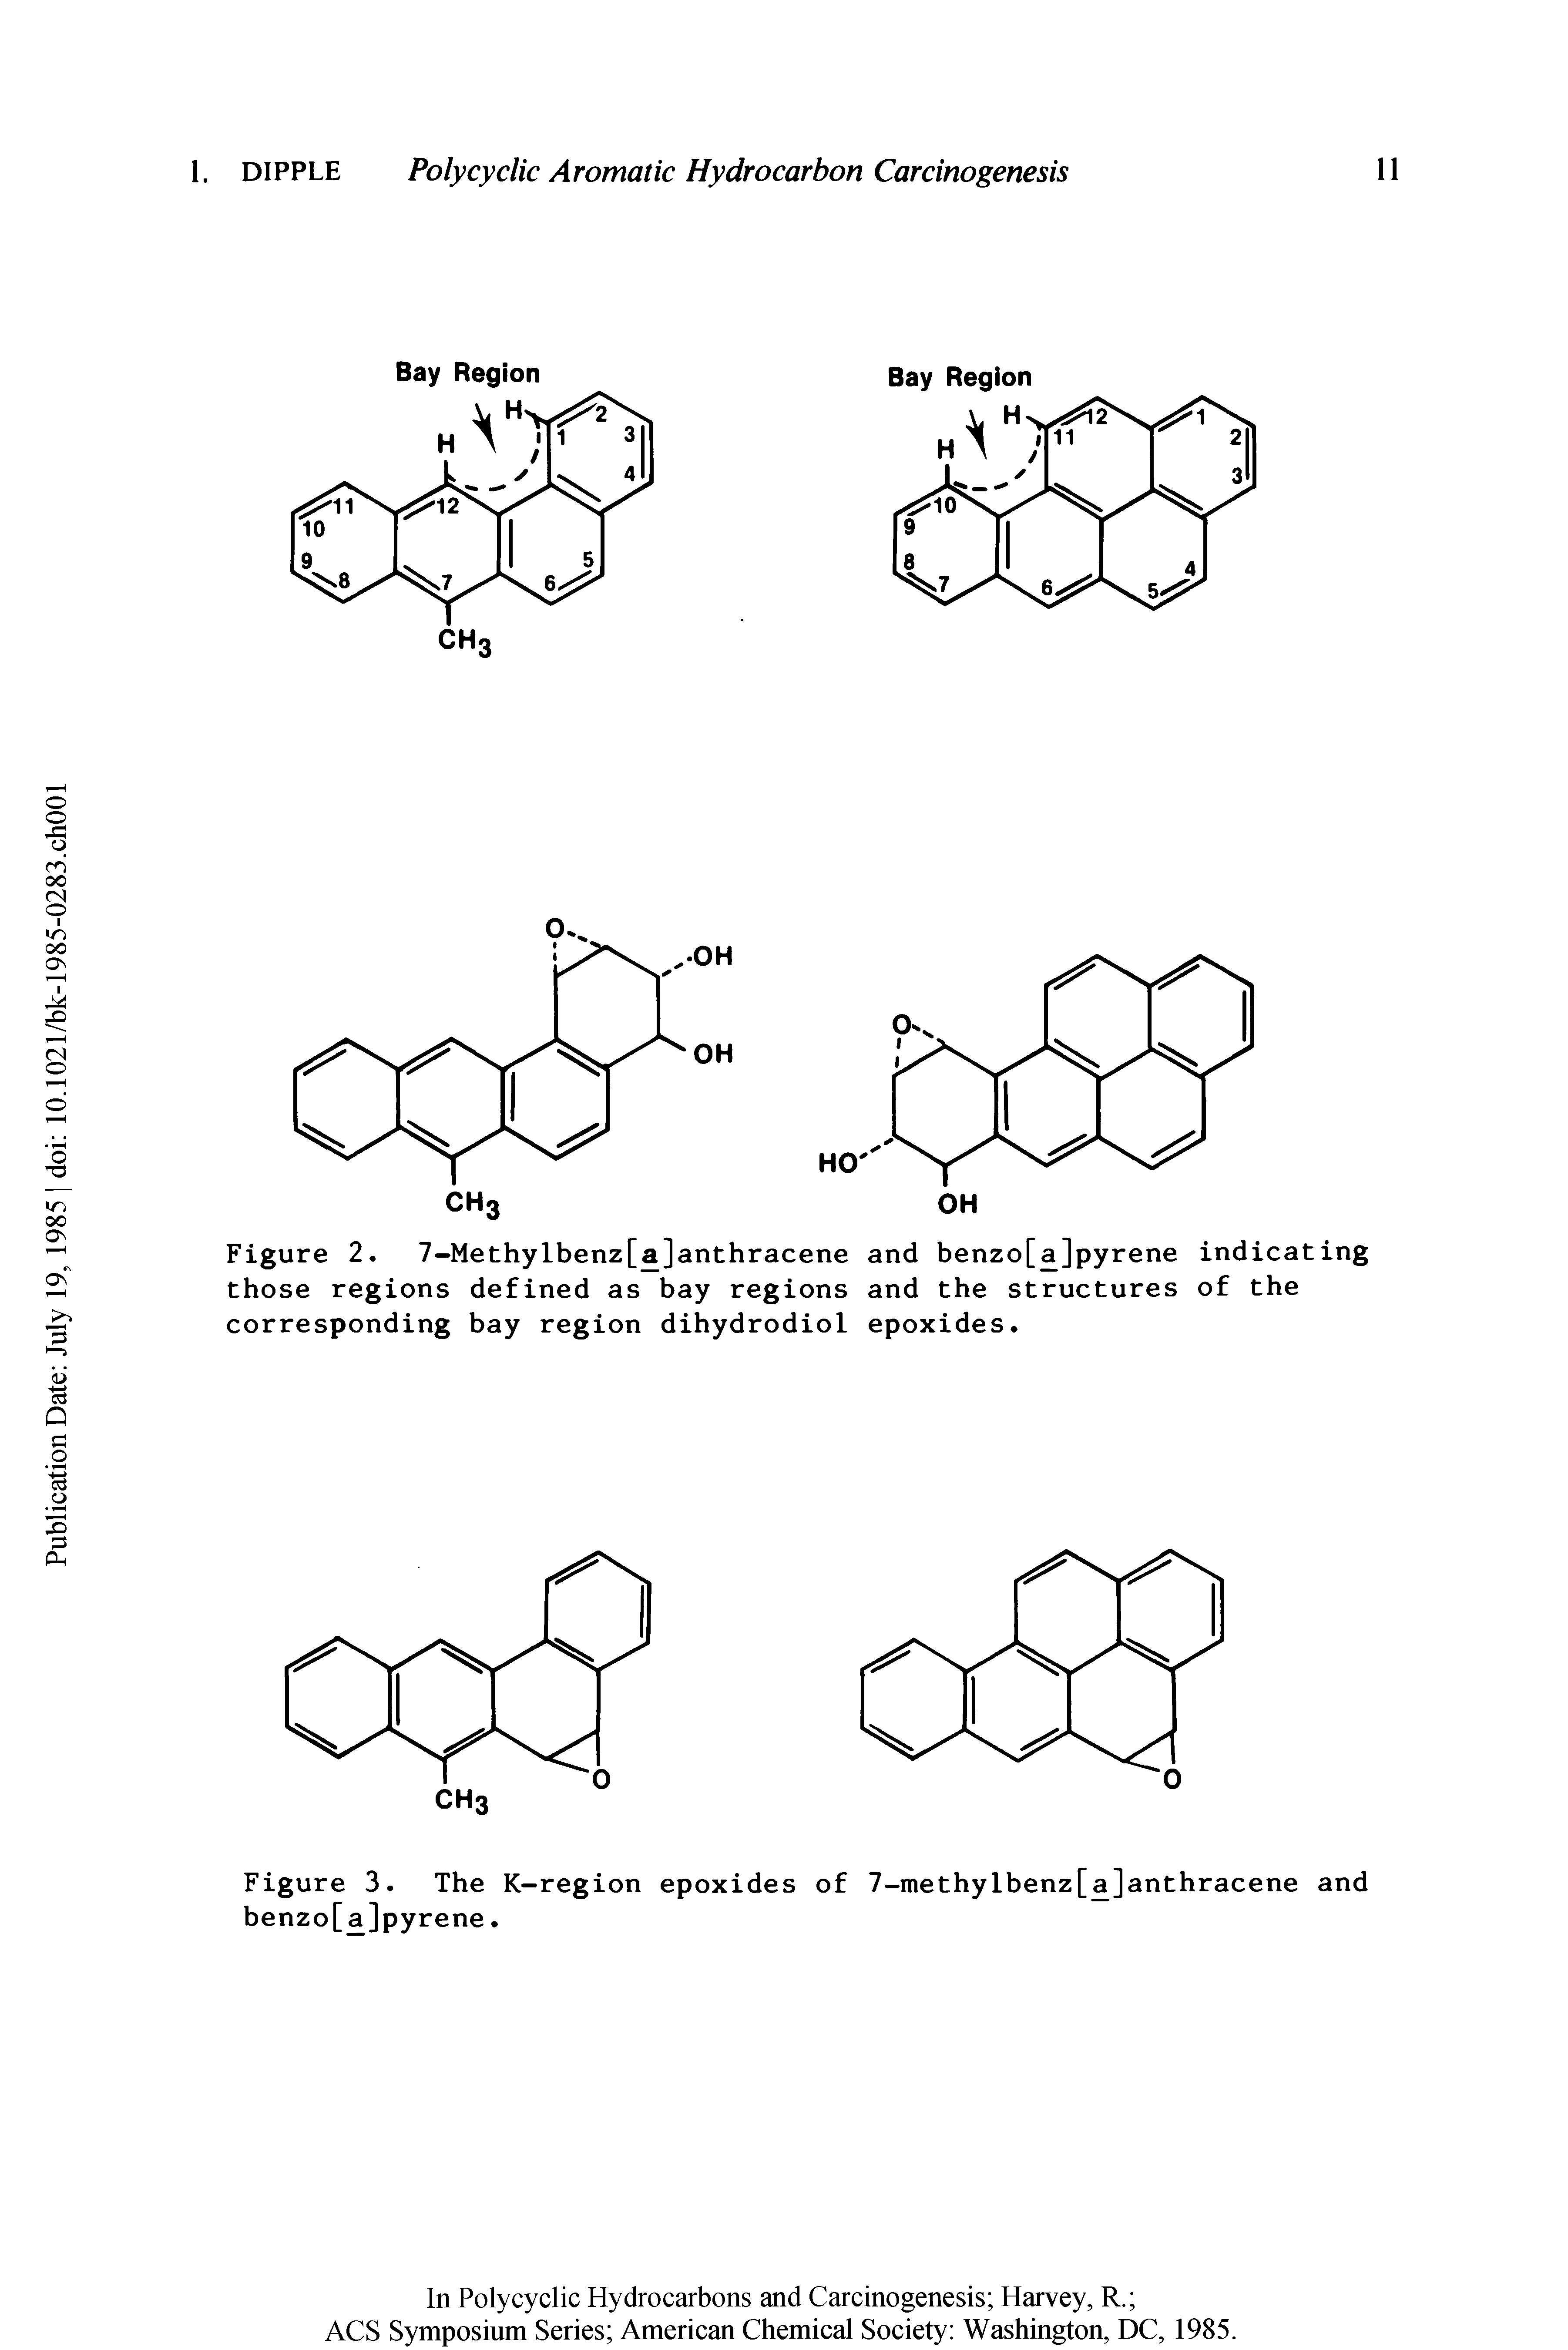 Figure 2. 7-Methylbenz[a]anthracene and benzo[a]pyrene indicating those regions defined as bay regions and the structures of the corresponding bay region dihydrodiol epoxides.